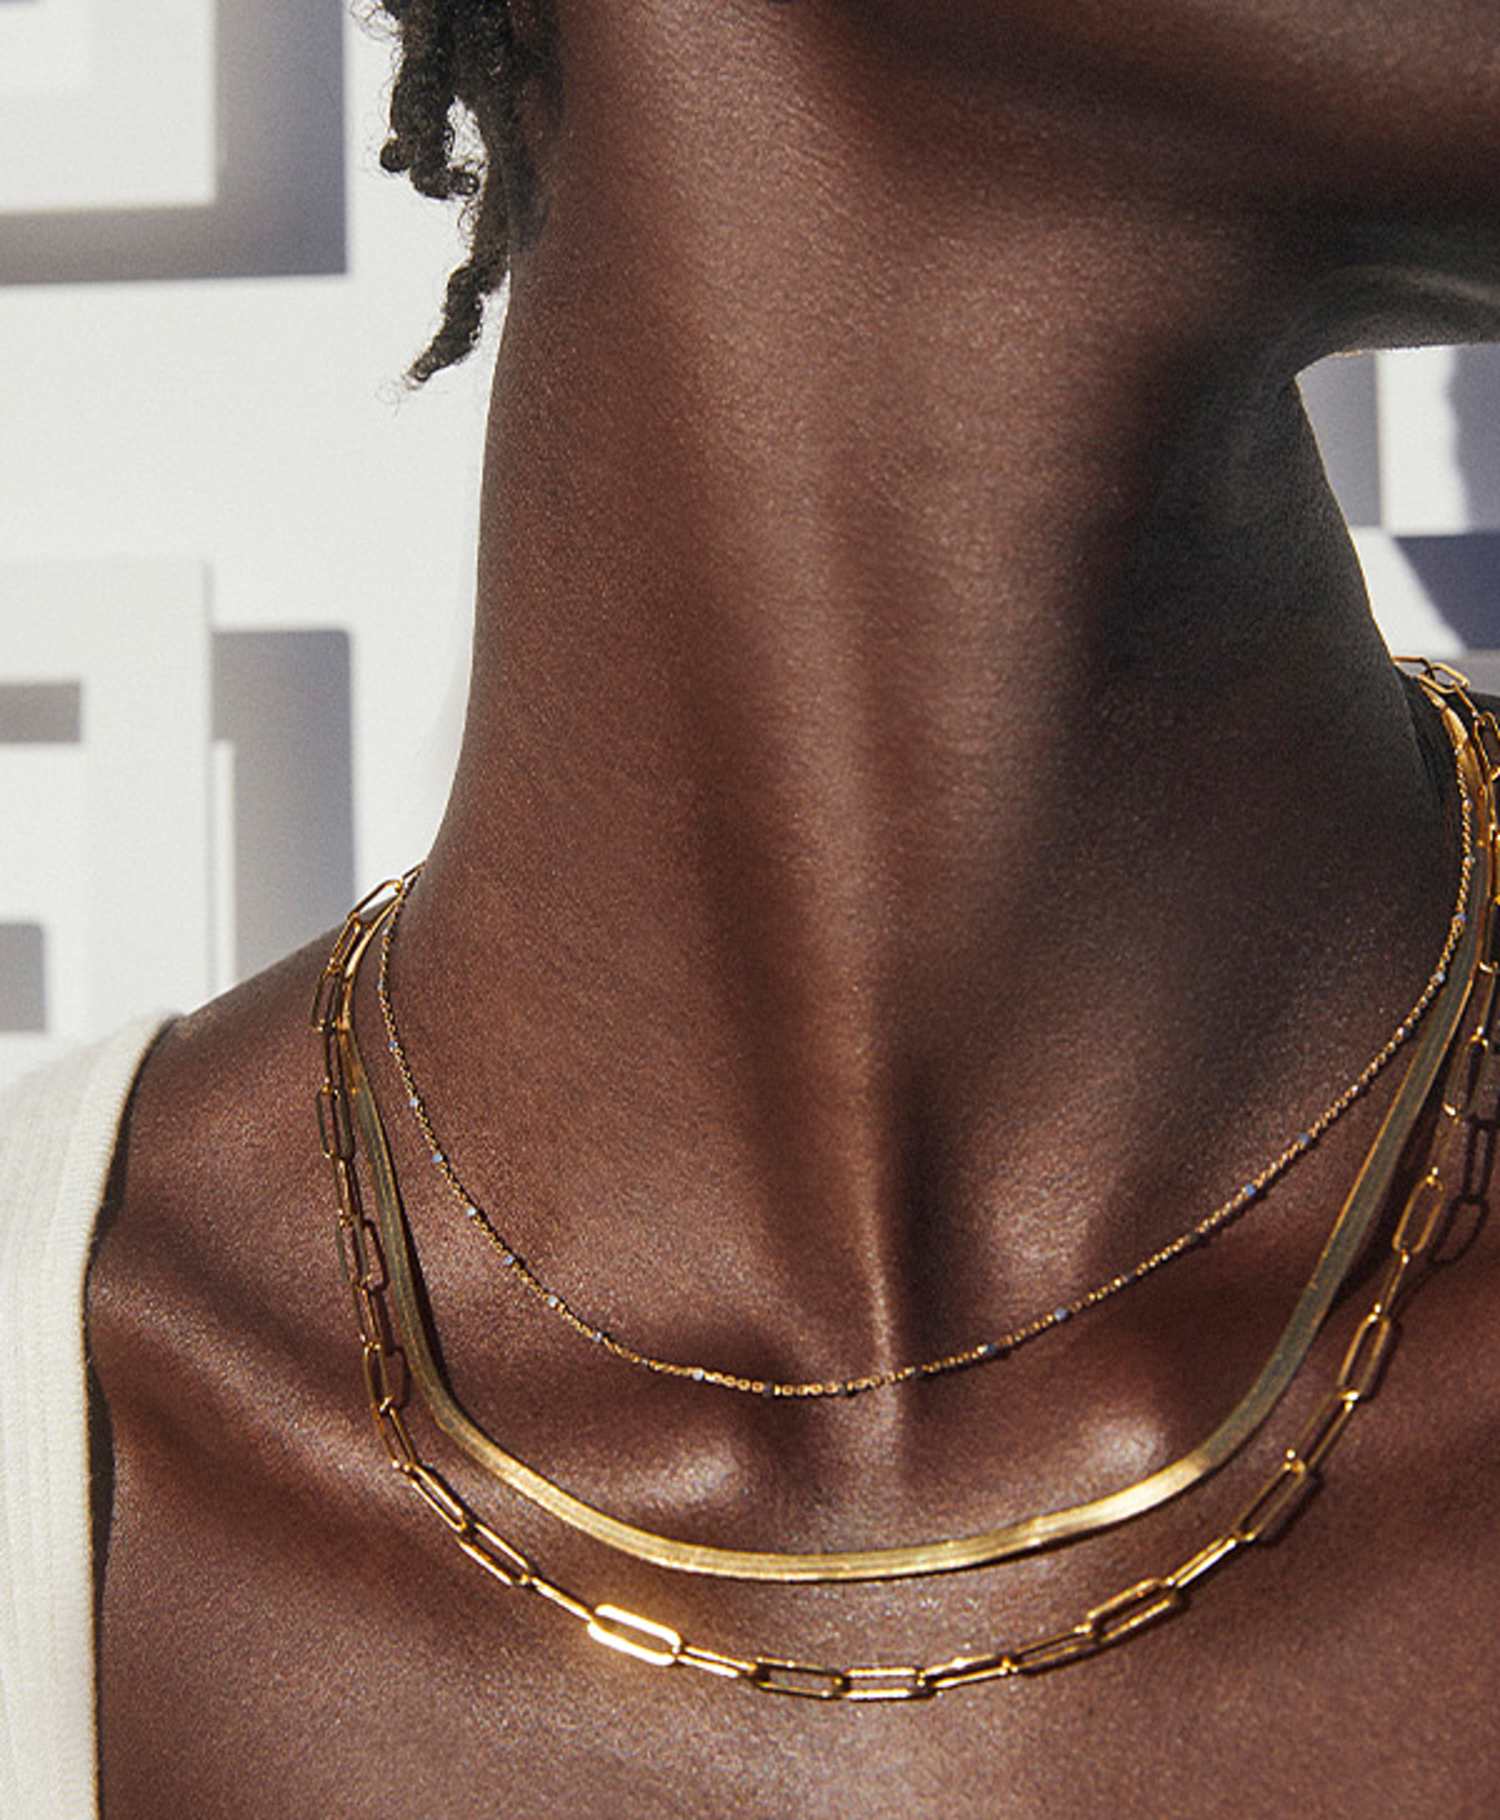 Image of model wearing multiple necklaces